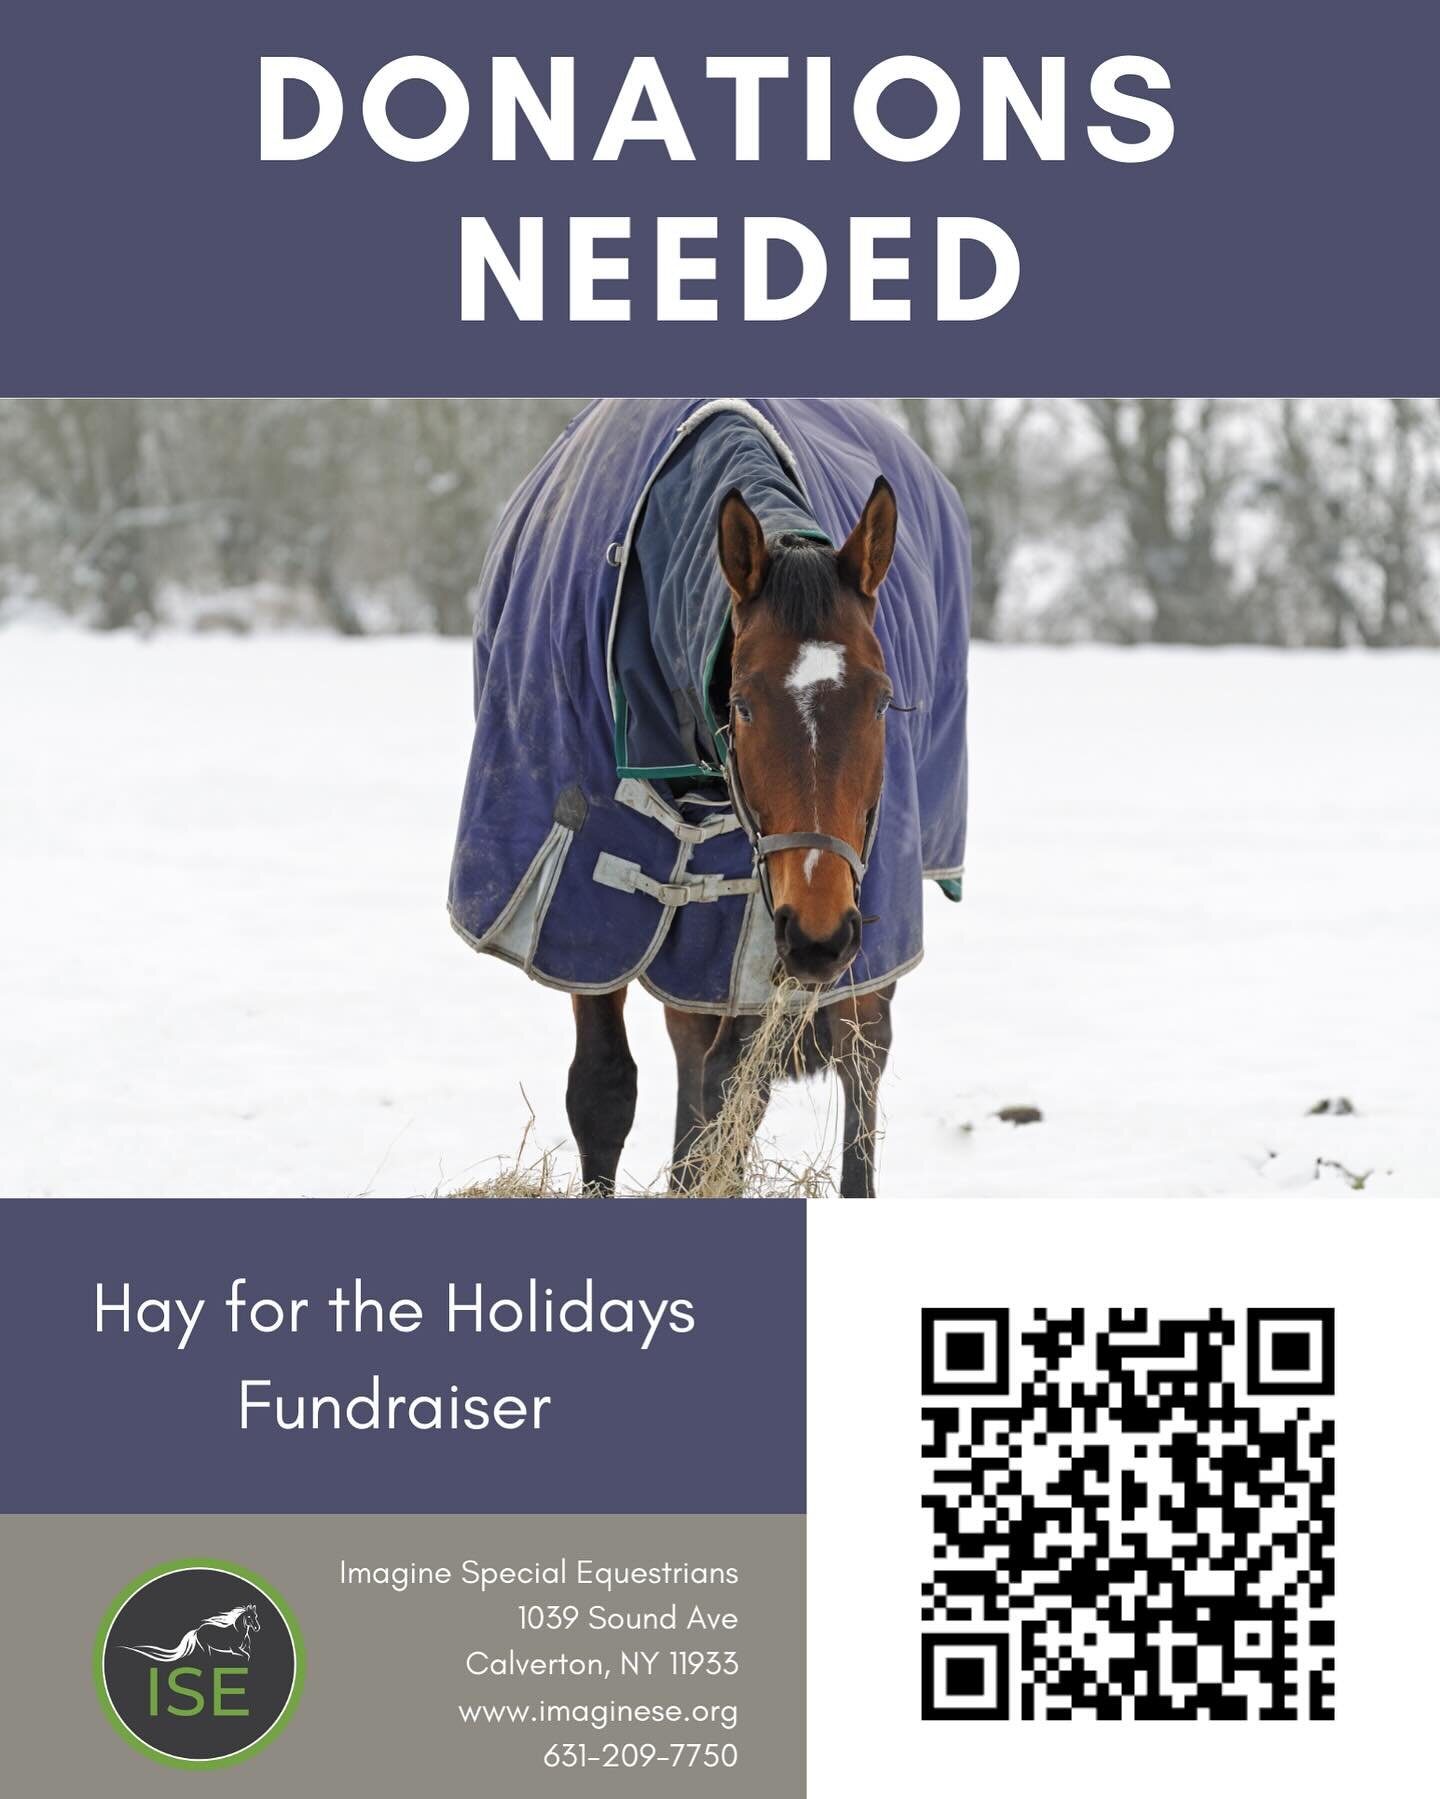 We are raising money to feed our herd. Any amount helps!